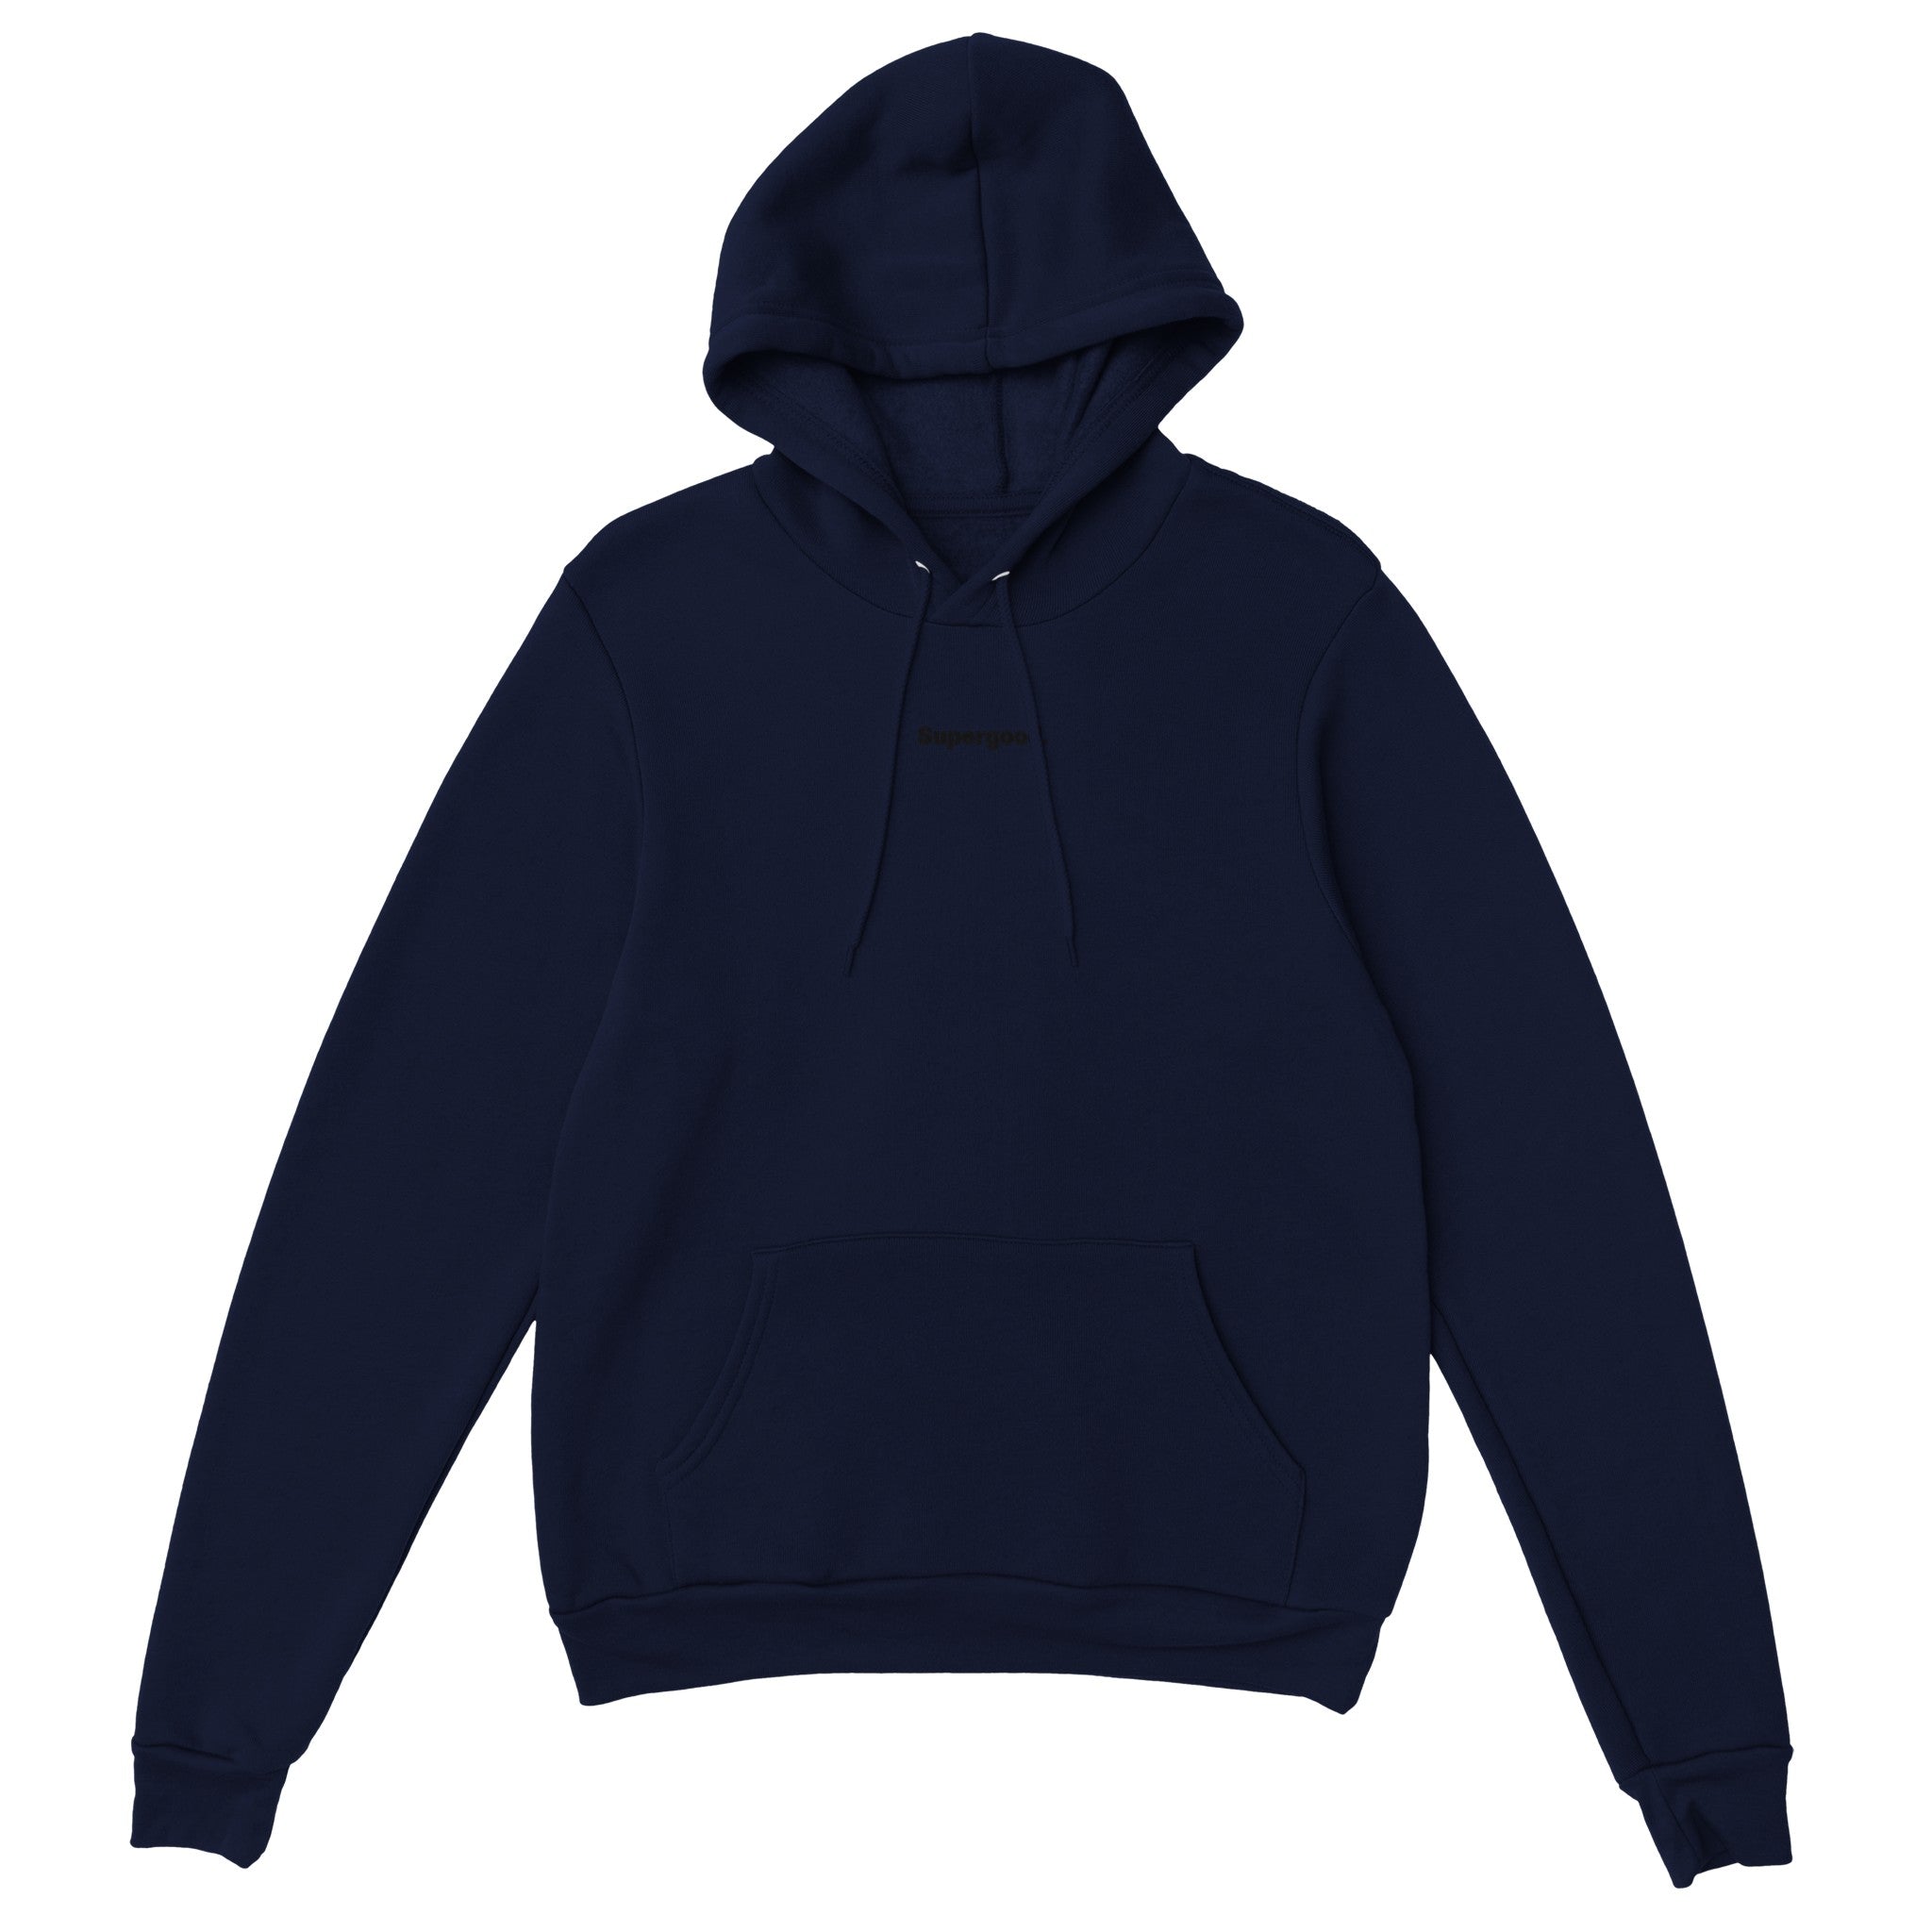 Embroidered Logo Hoodie by Supergood.-Supergood.